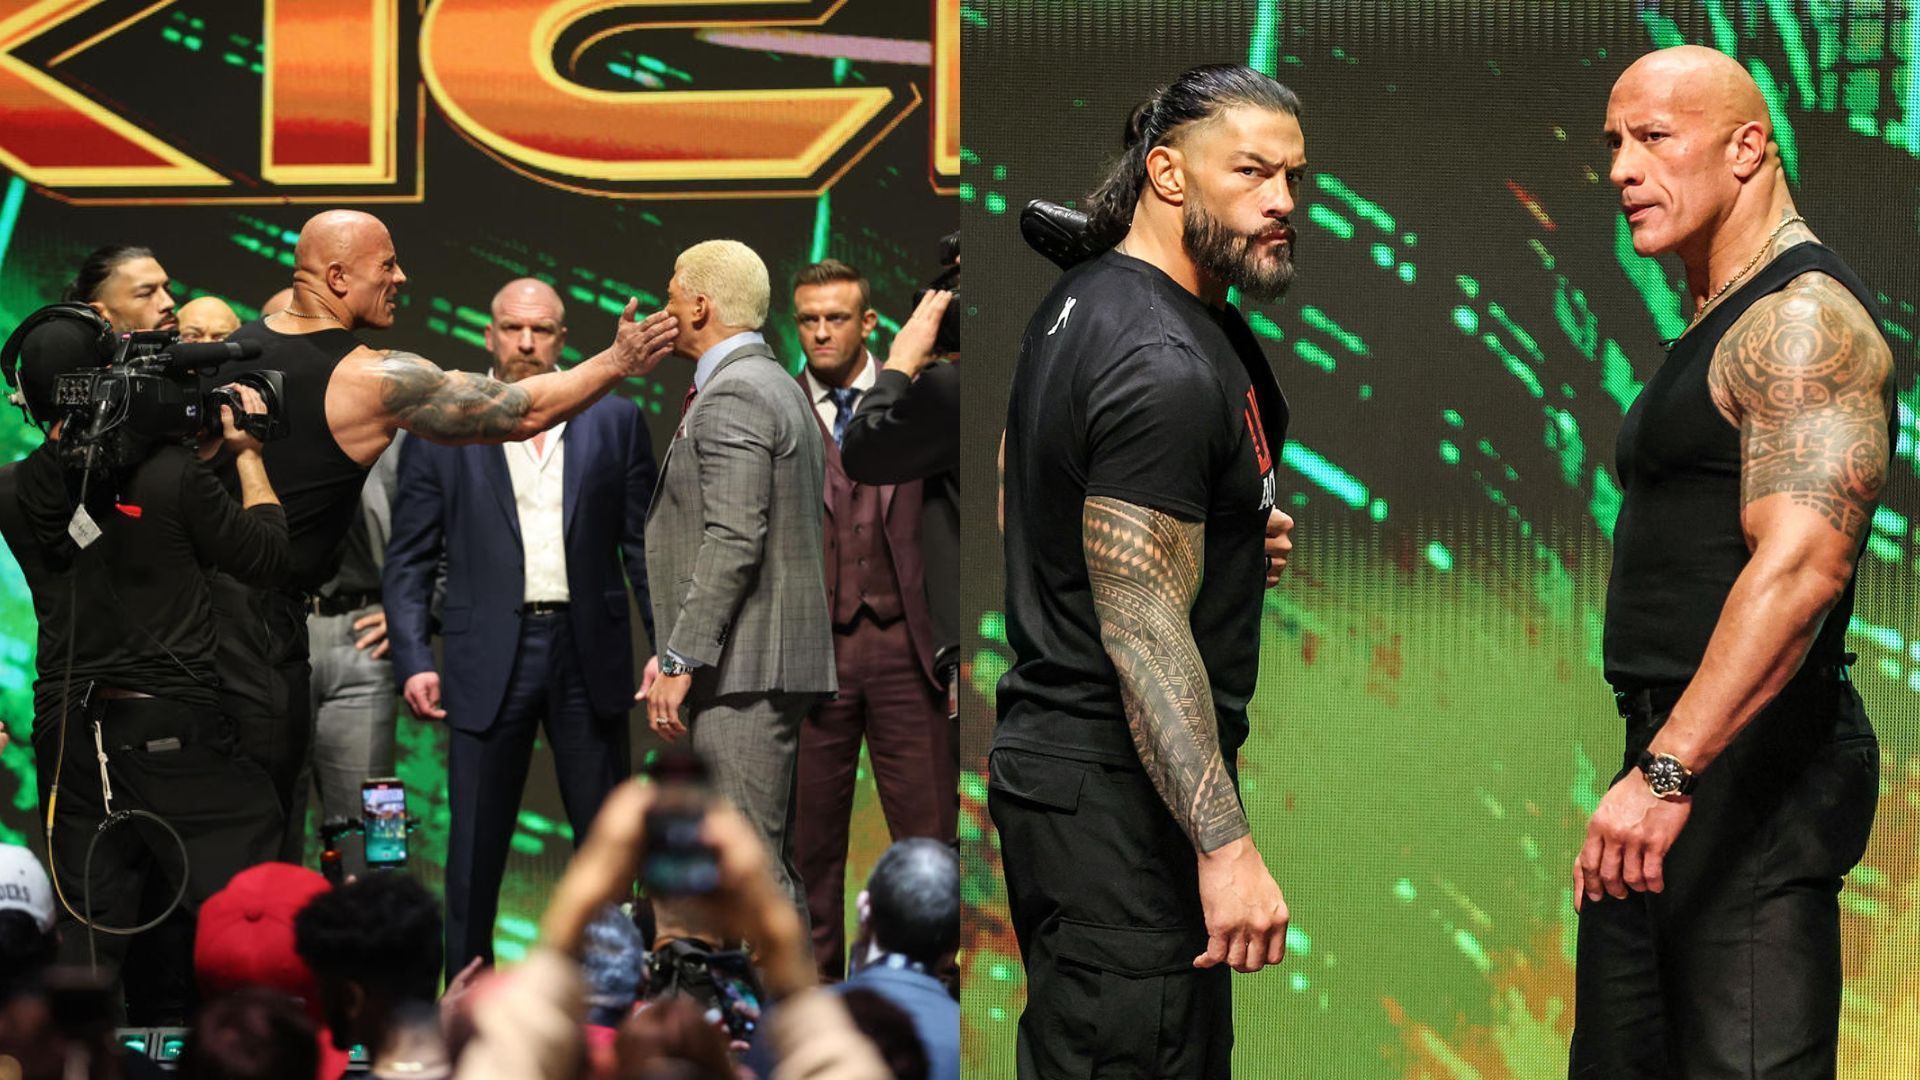 The Rock and Roman Reigns are now on the same side